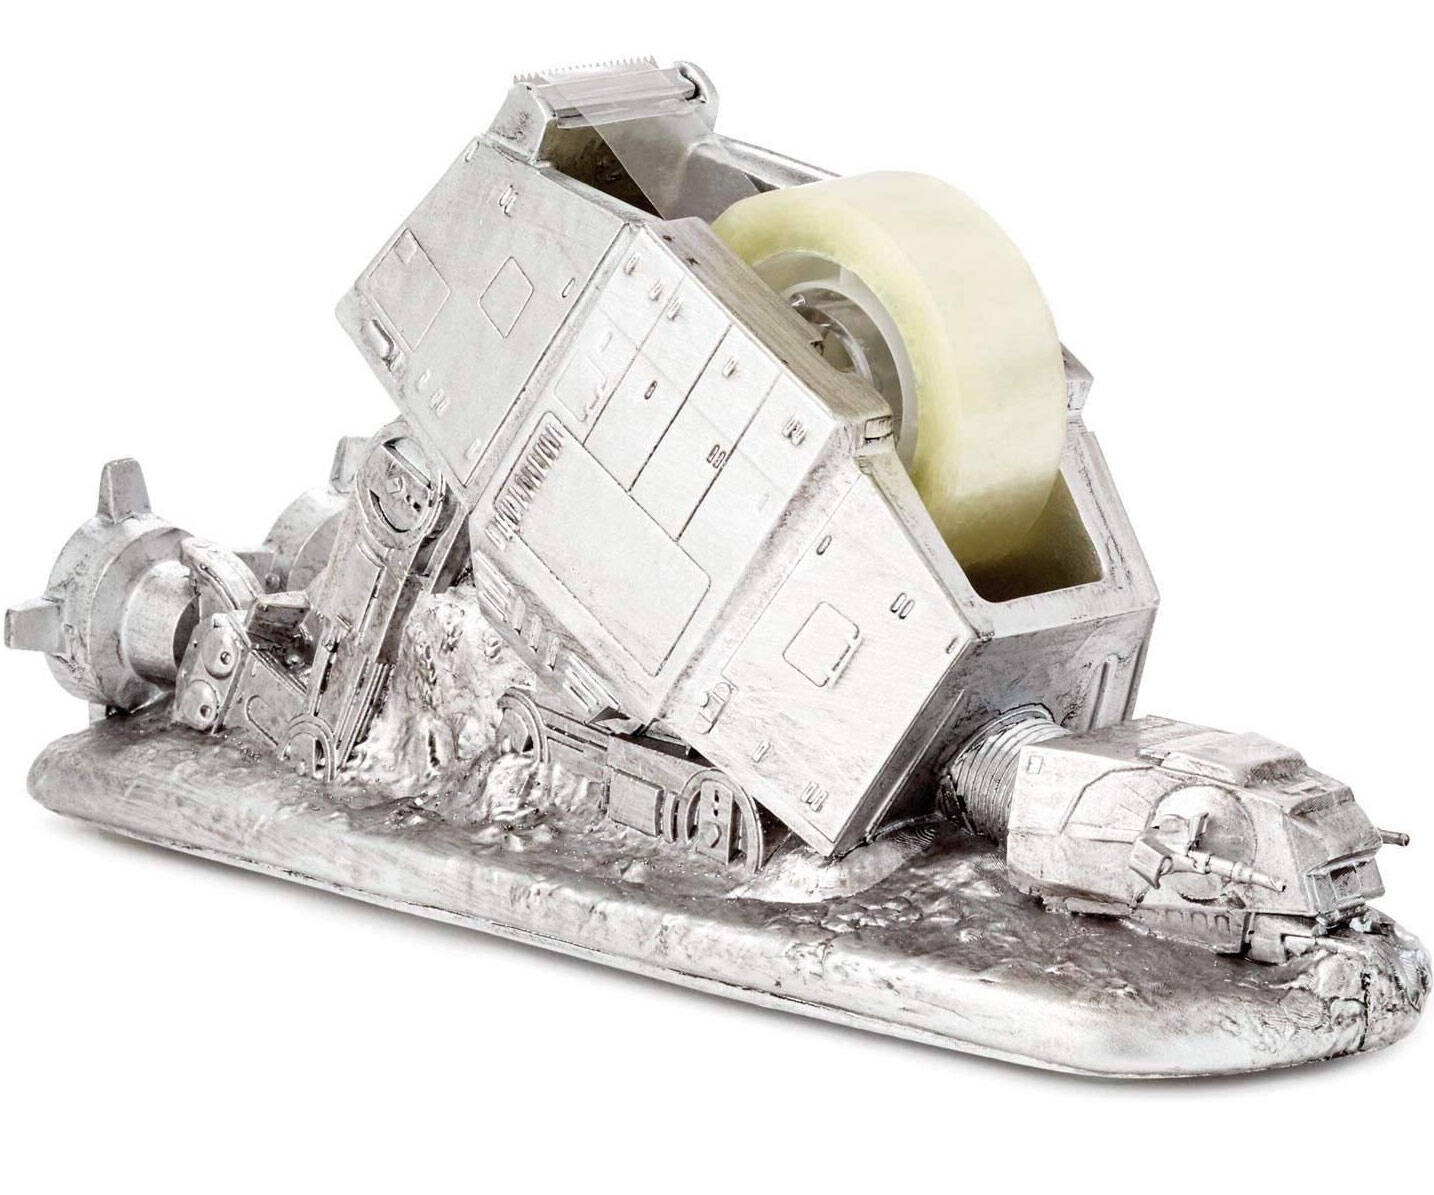 Fallen AT-AT Tape Dispenser - //coolthings.us